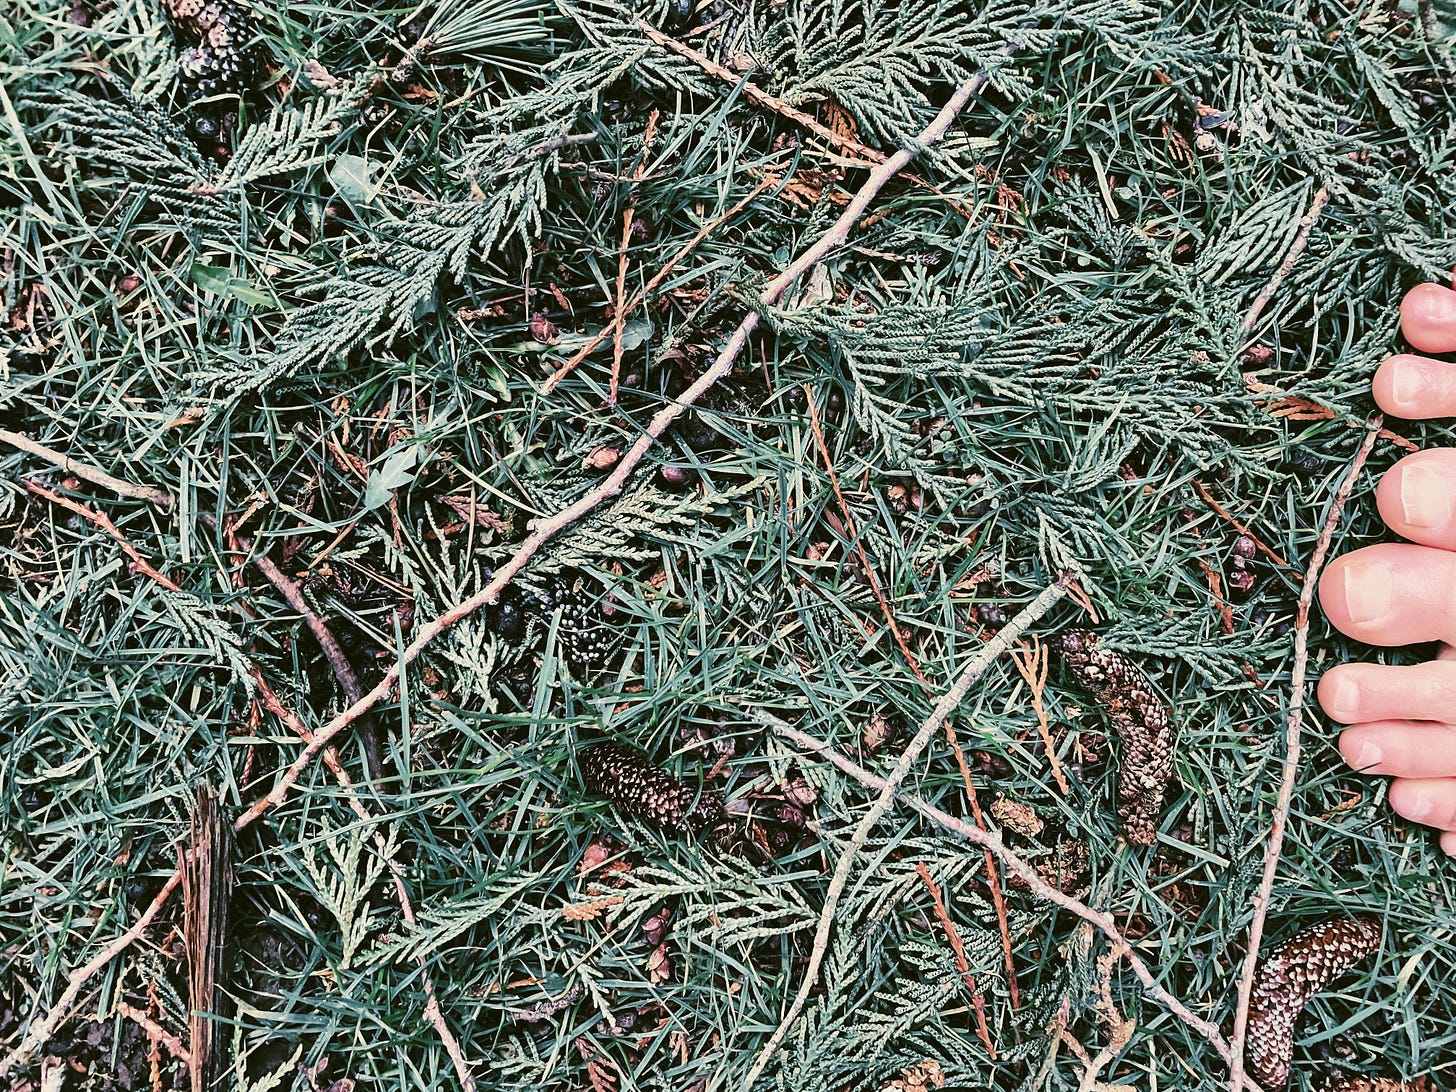 photo of bark, twigs, seeds and pine needles with human toes peeking in from the right side